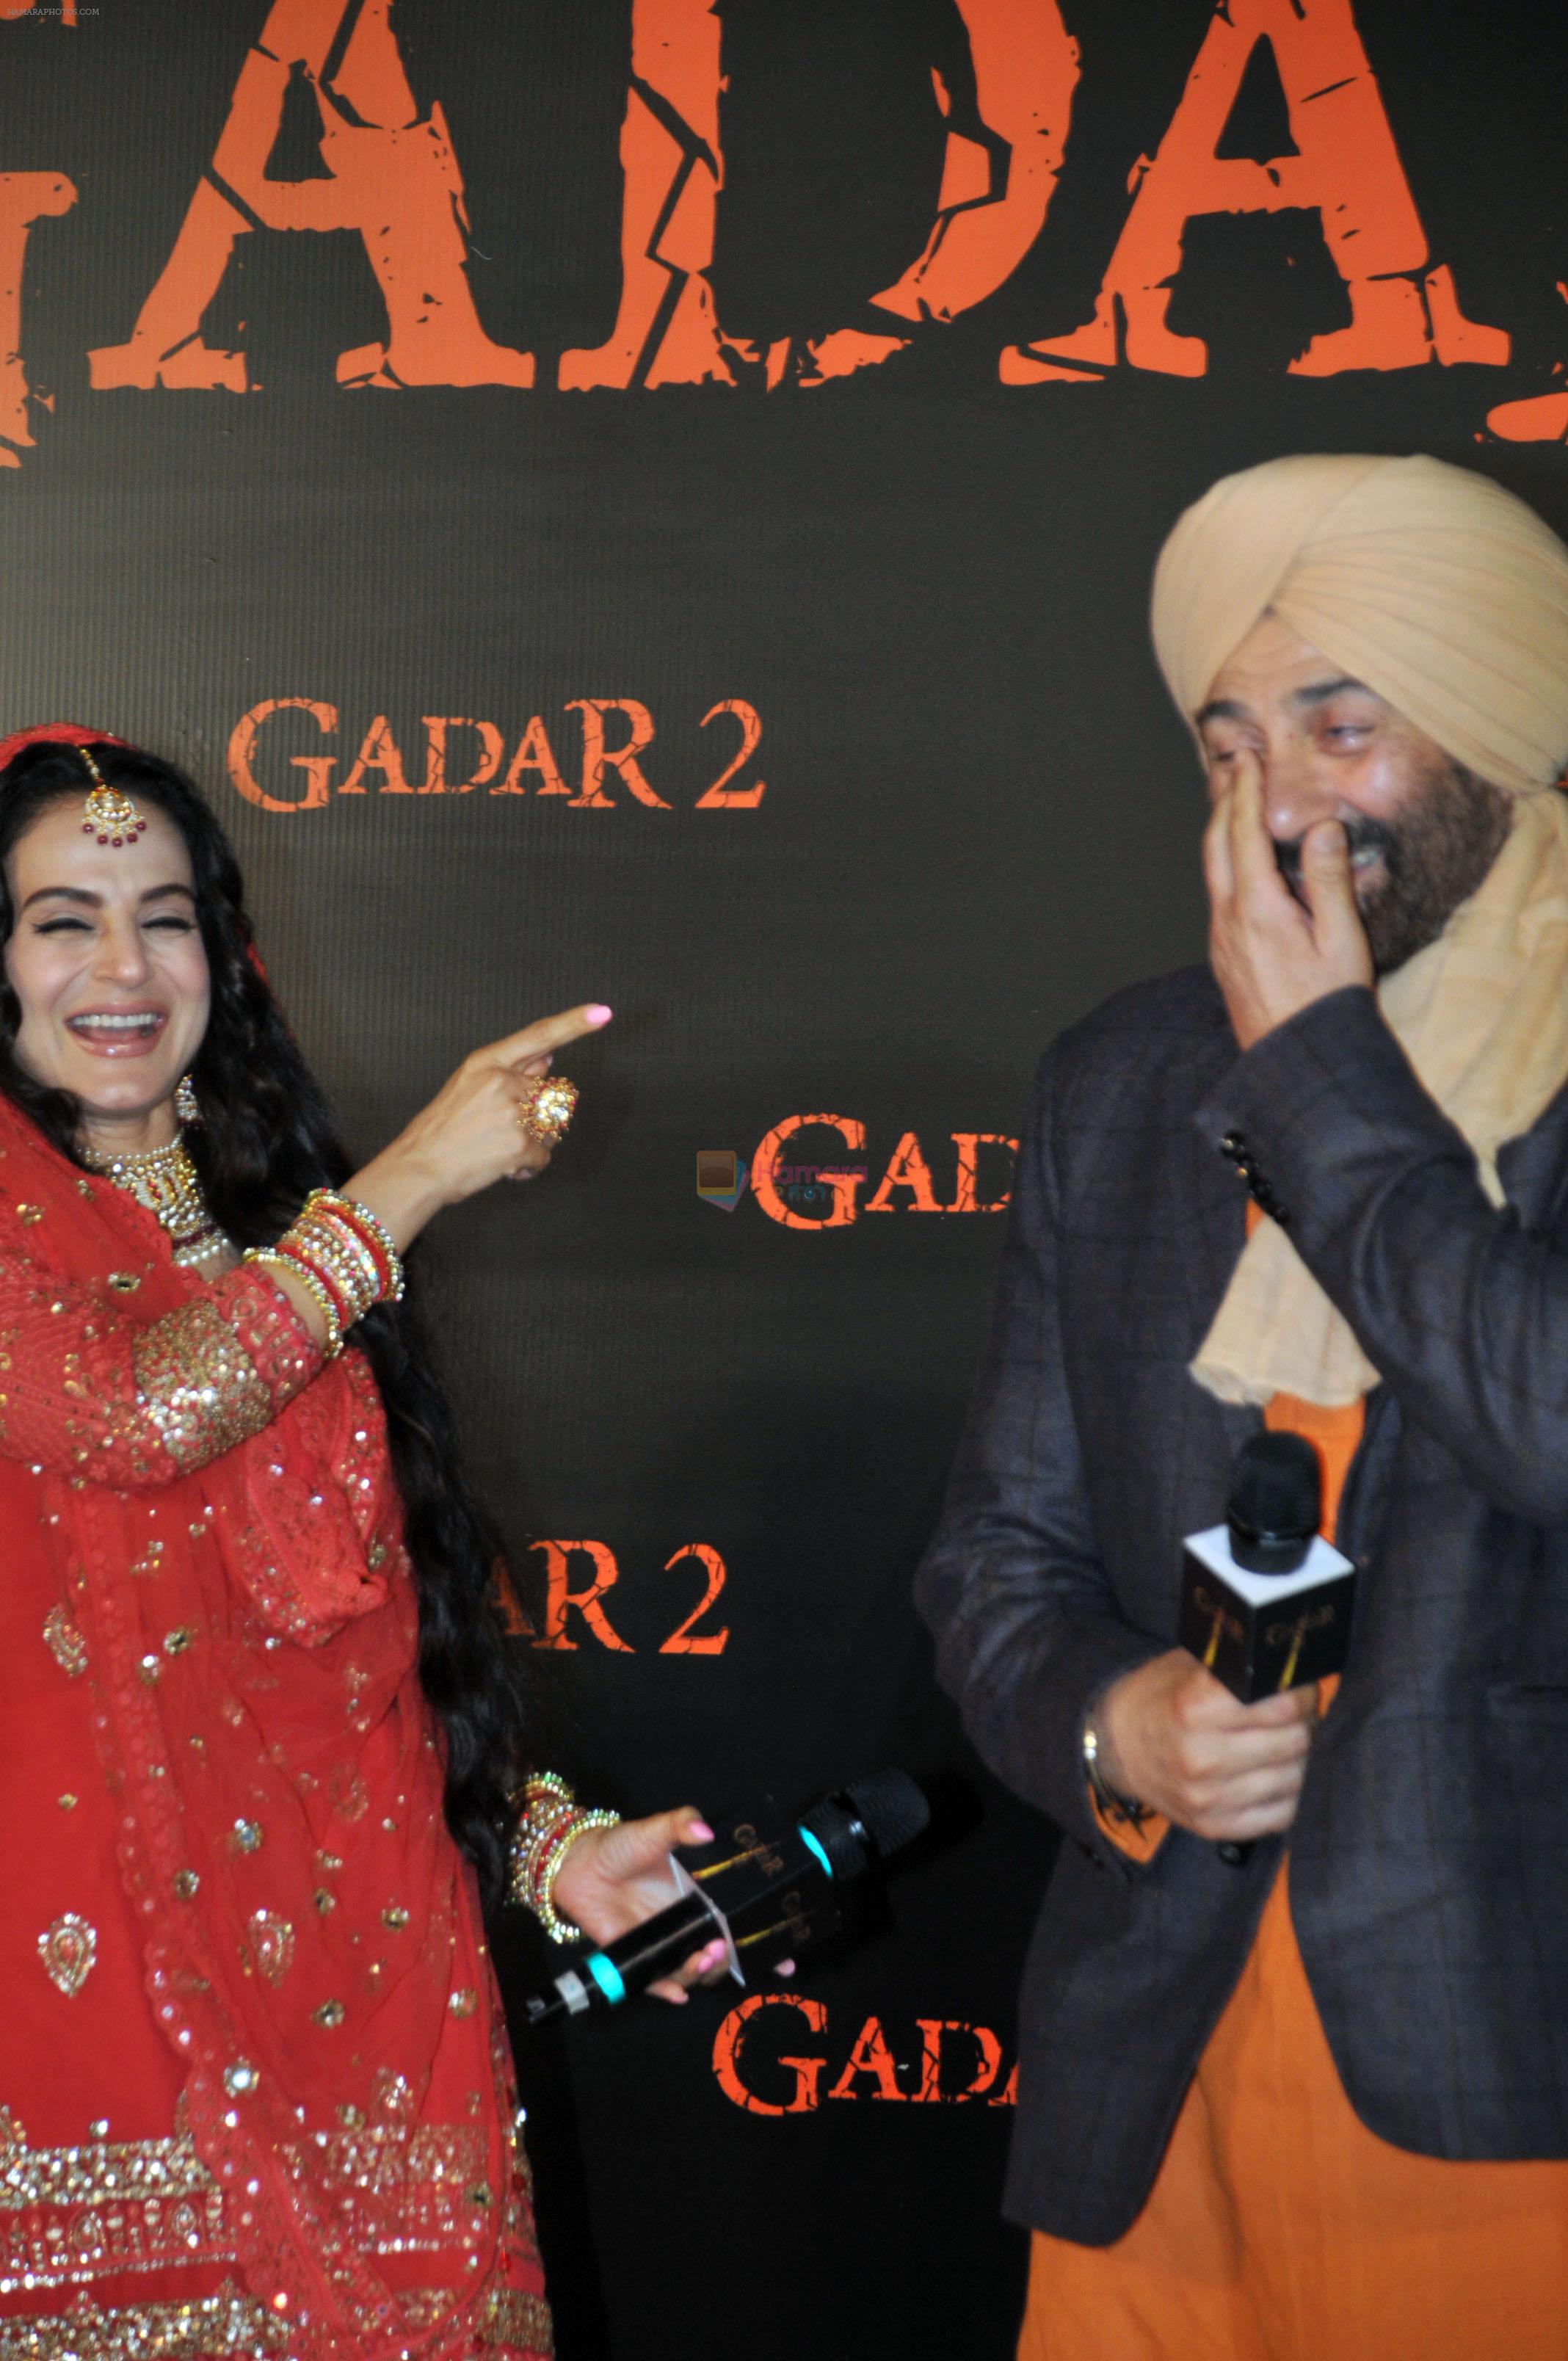 Ameesha Patel, Sunny Deol at the trailer launch of film Gadar 2 on 26 July 2023